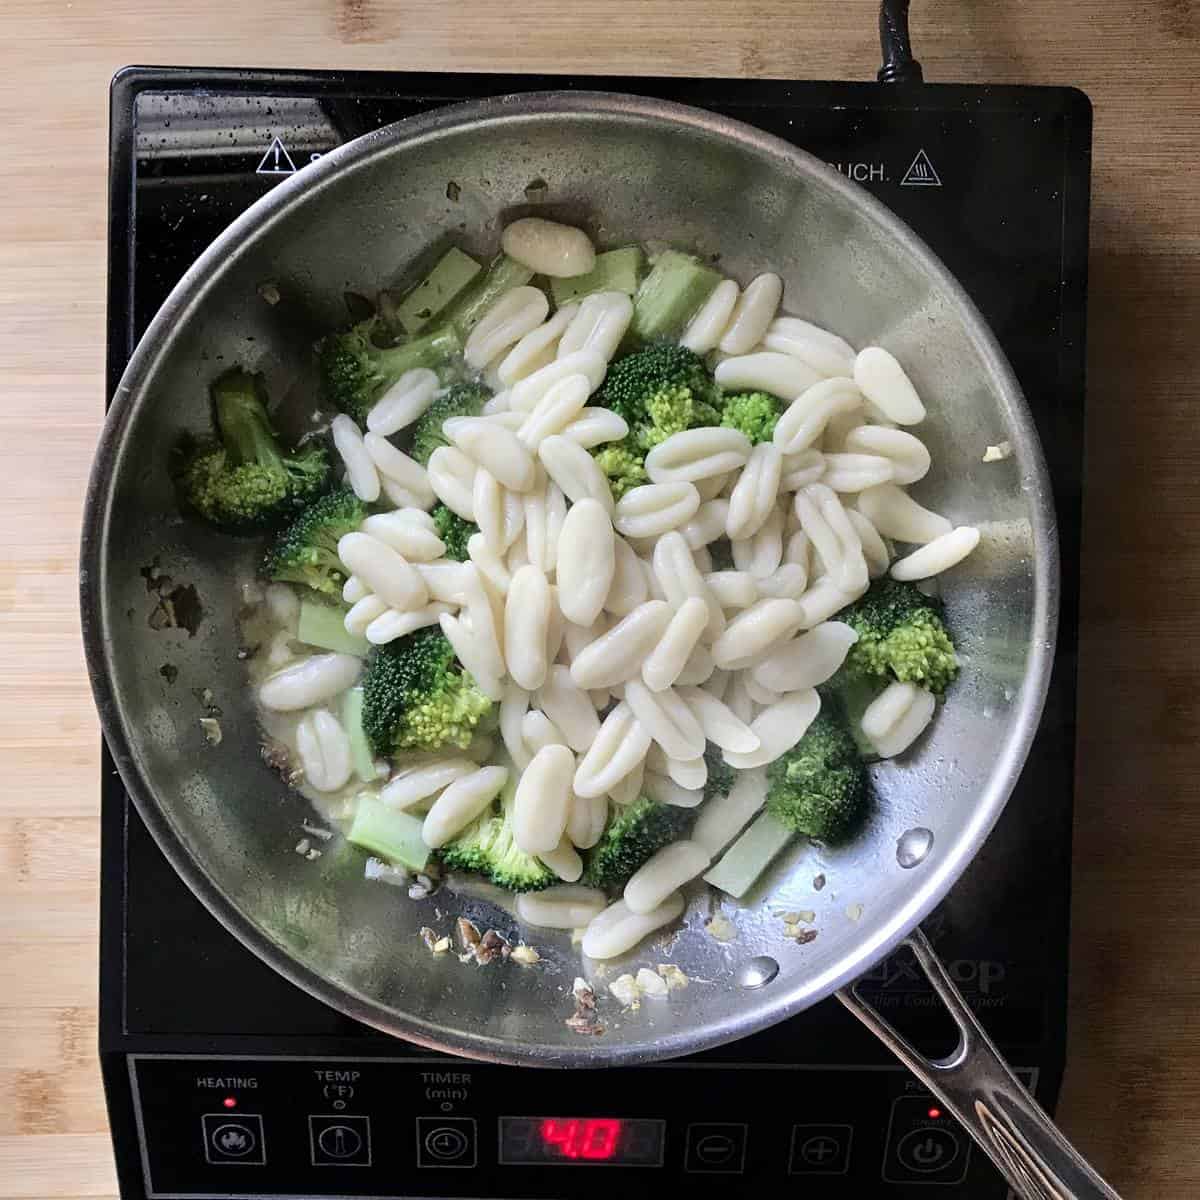 Combining the broccoli and cavatelli with the sauteed garlic and anchovies.